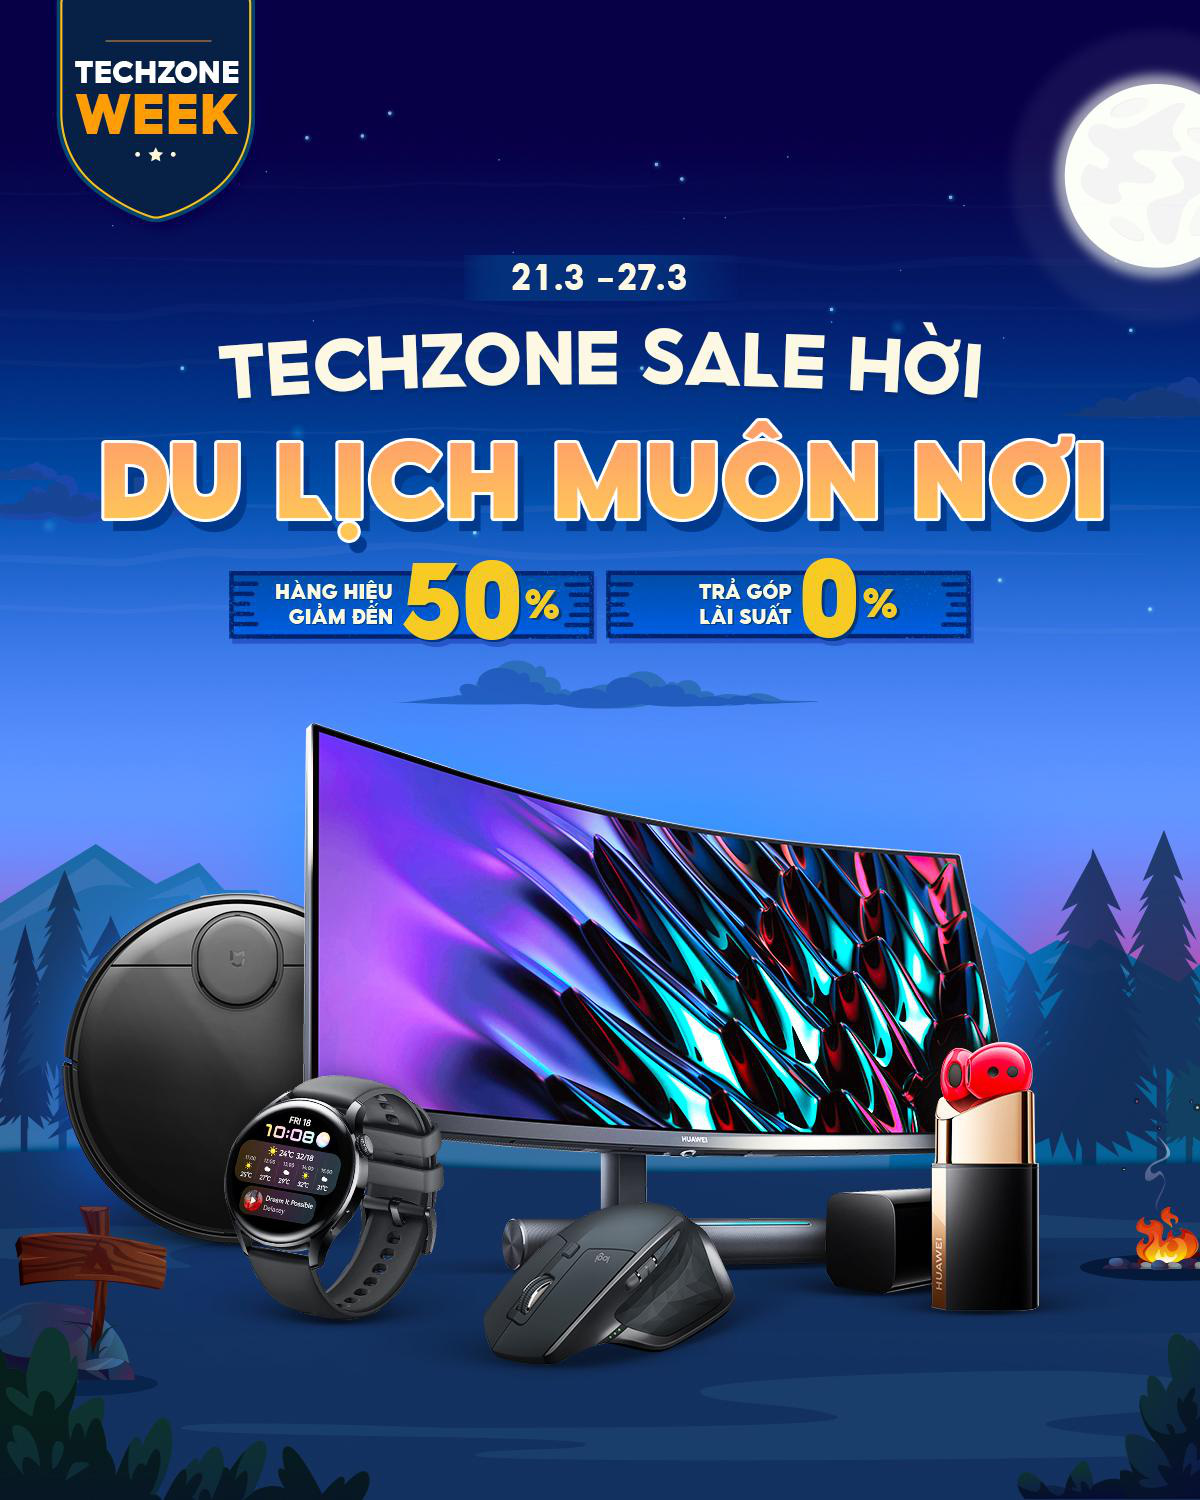 Up to 50% off, 0% interest installment installments and a series of extended promotions only available at Techzone Electronic Week on Shopee - Photo 1.